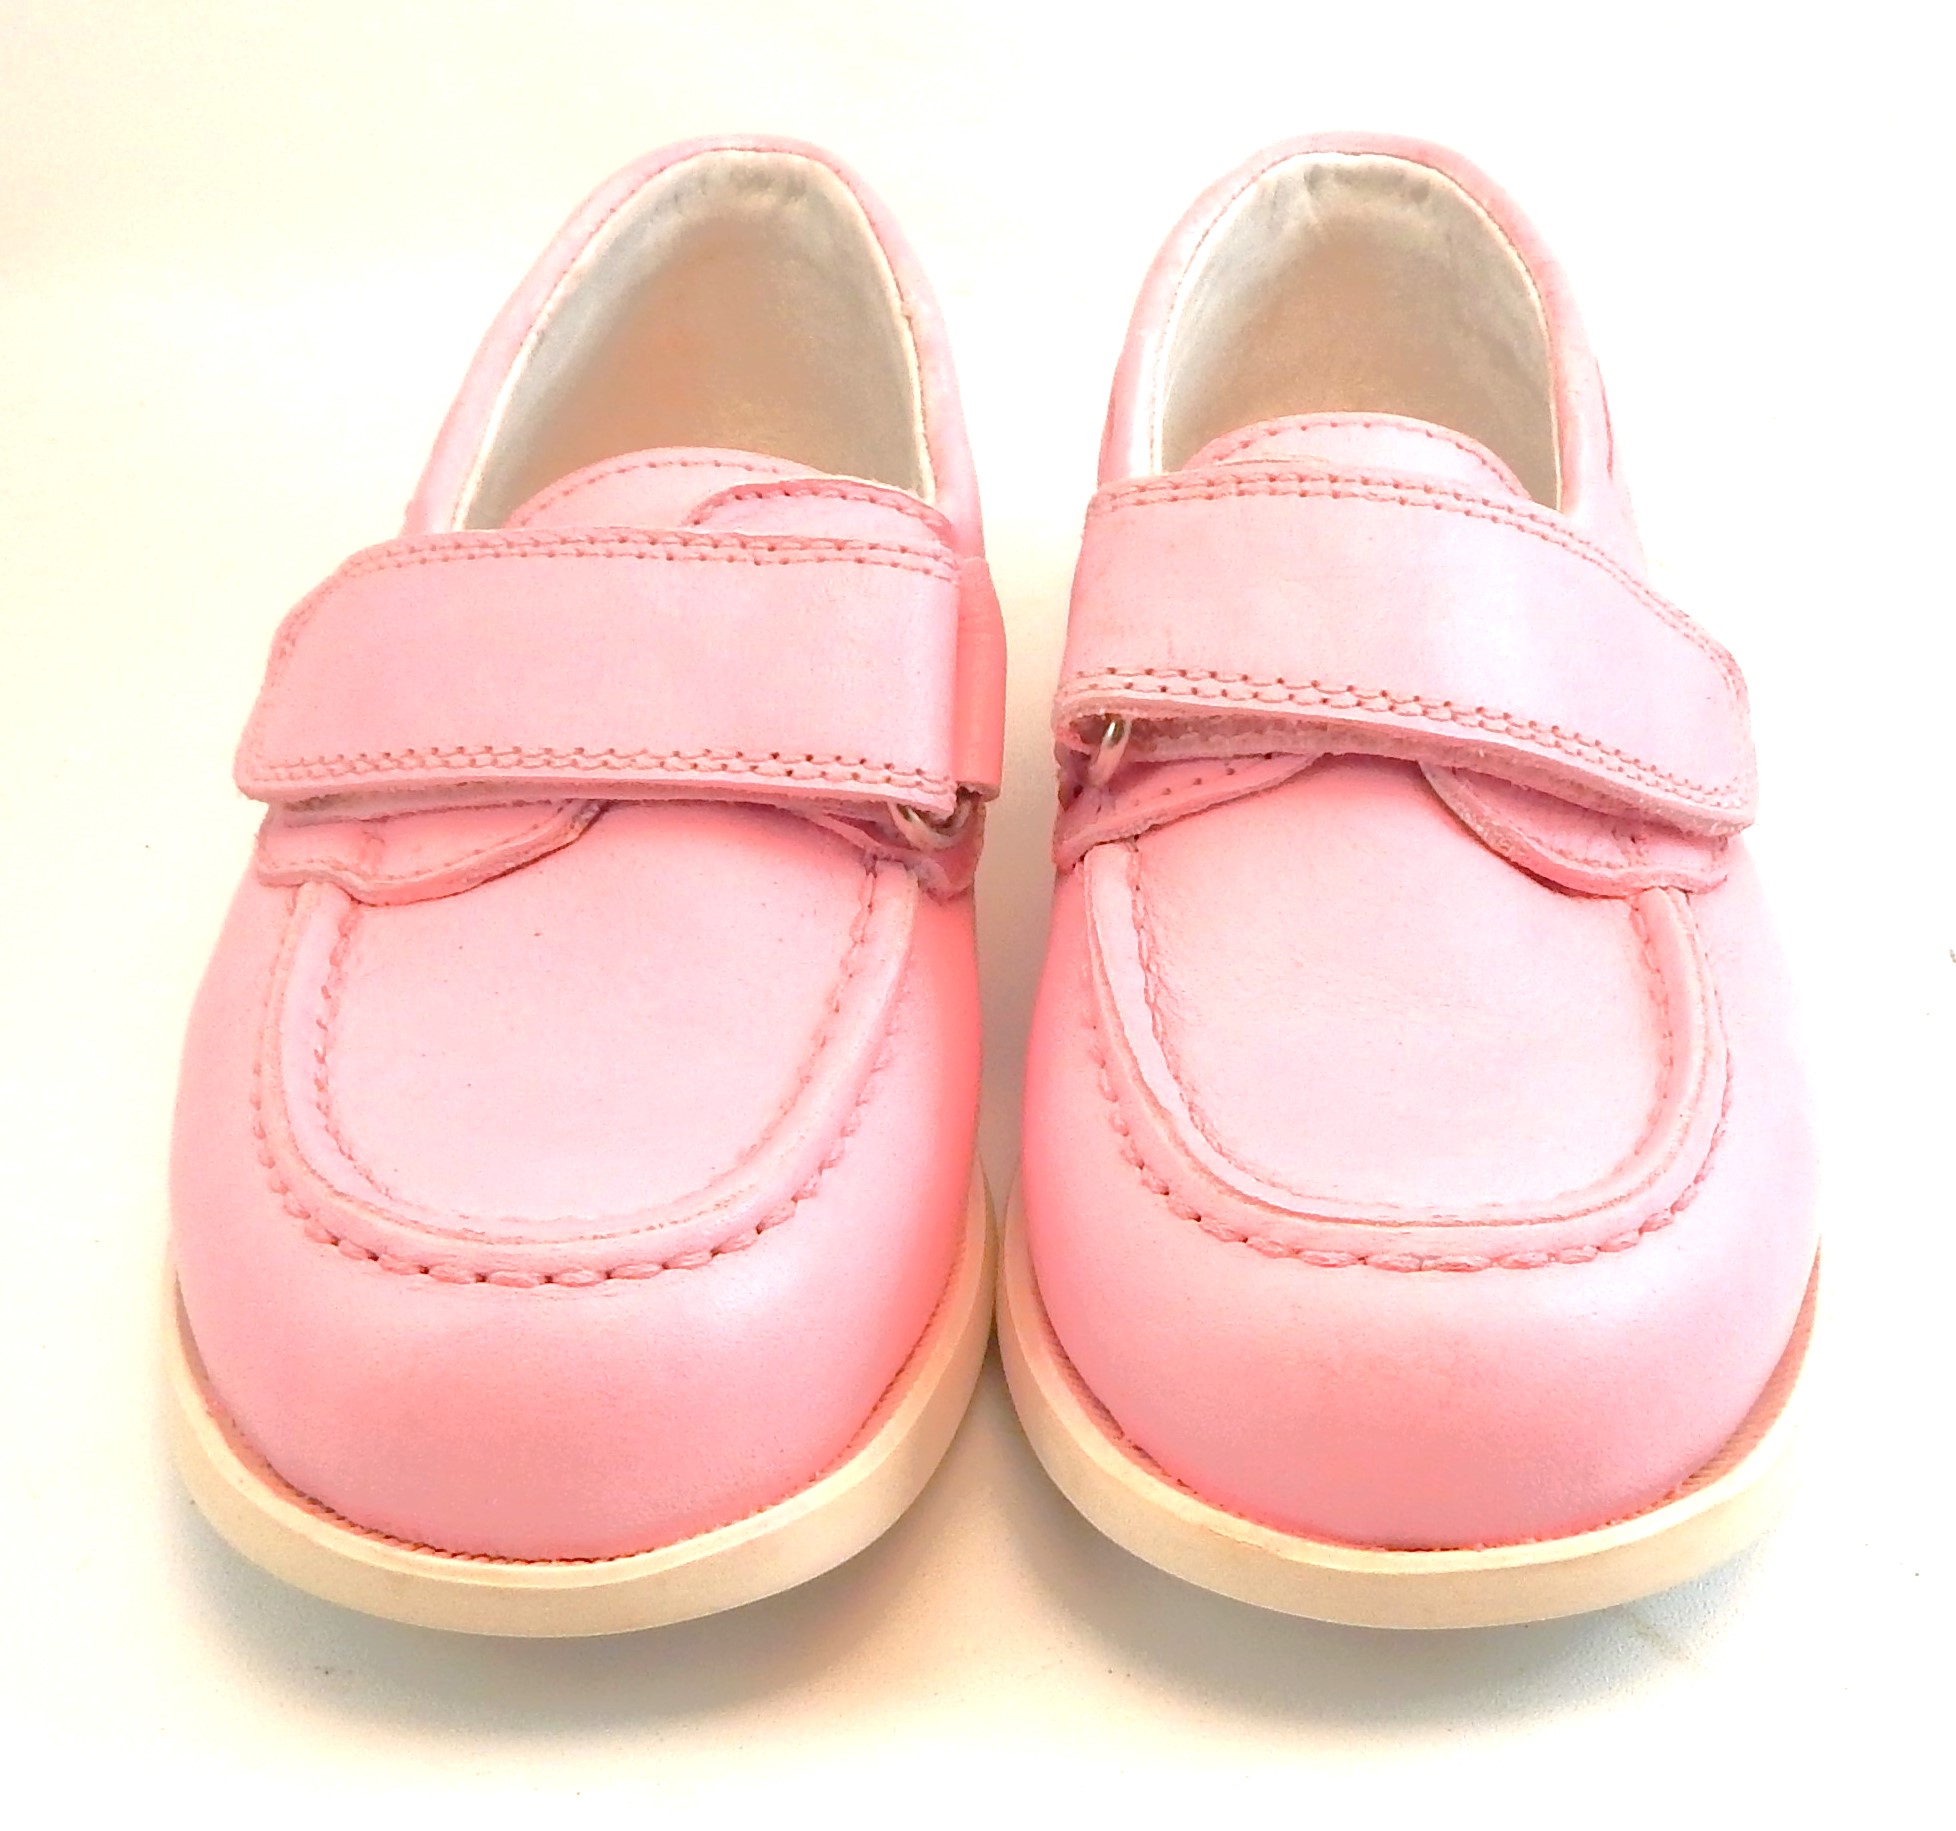 Faro B-7162 S - Pink Boat Shoe Loafers - Euro 25 Size 8